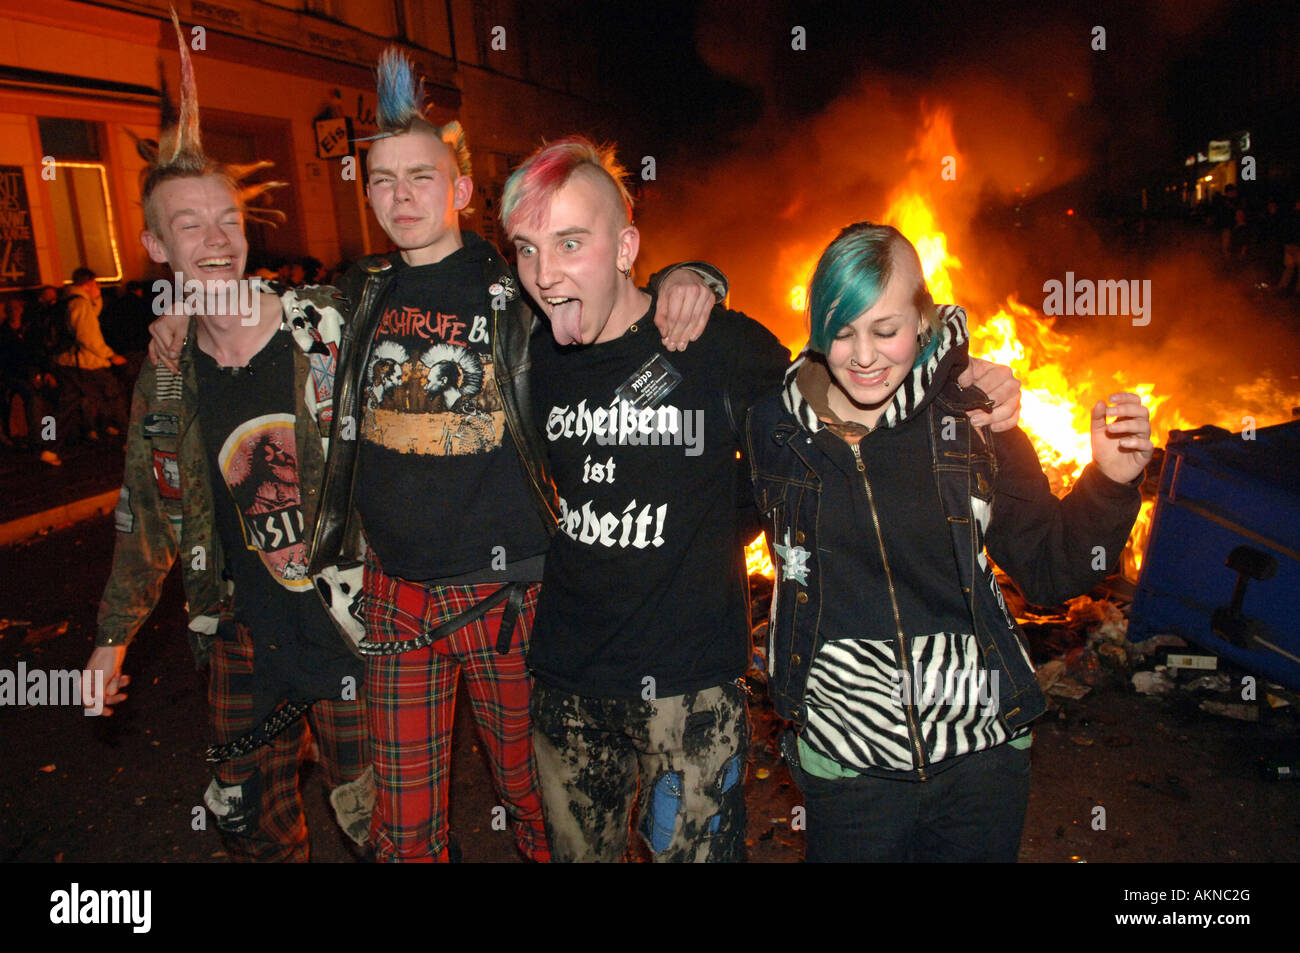 Punks taking part in riots on May 1, Berlin, Germany Stock 